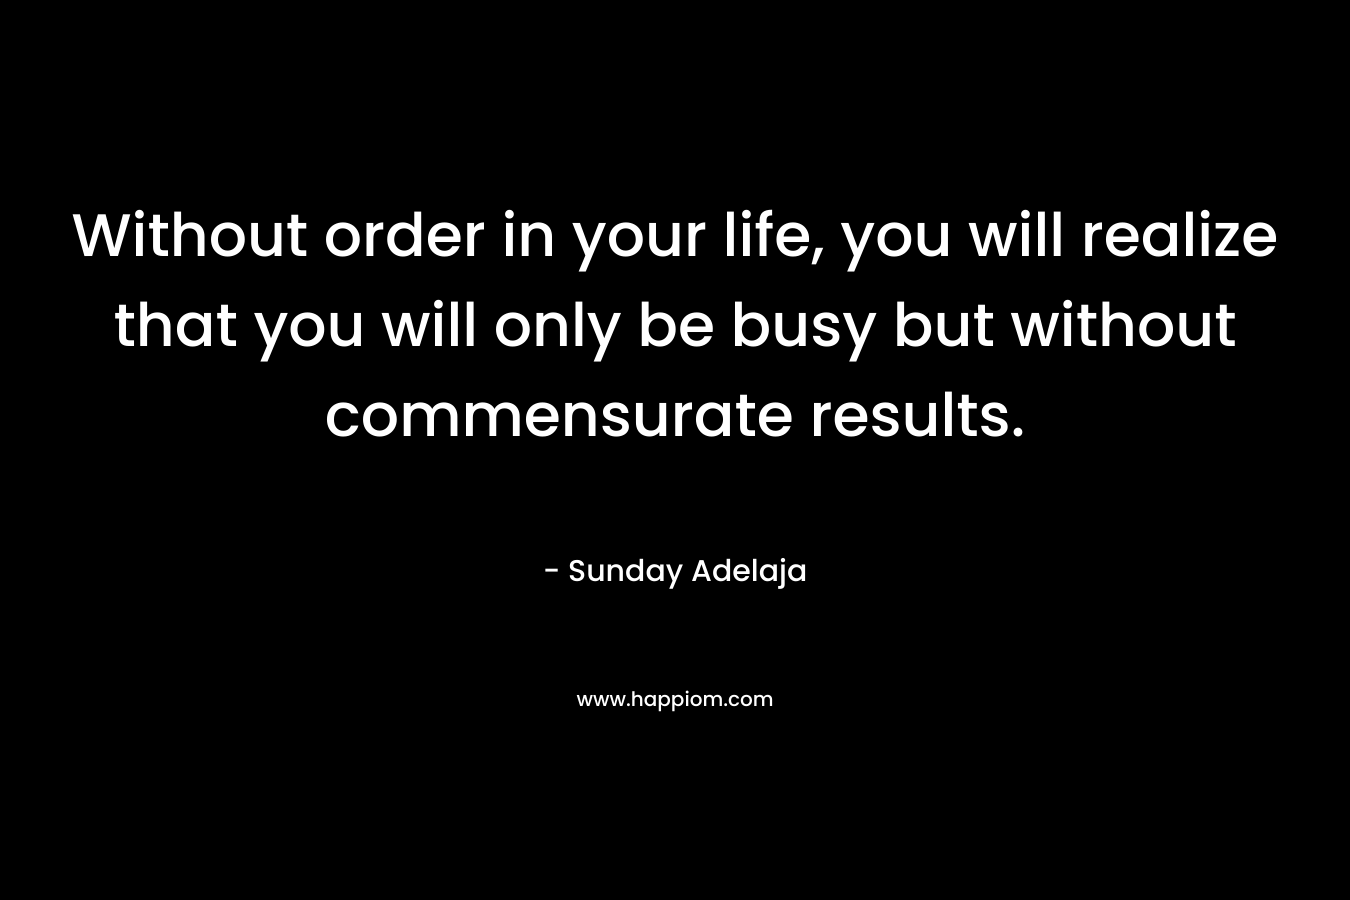 Without order in your life, you will realize that you will only be busy but without commensurate results.